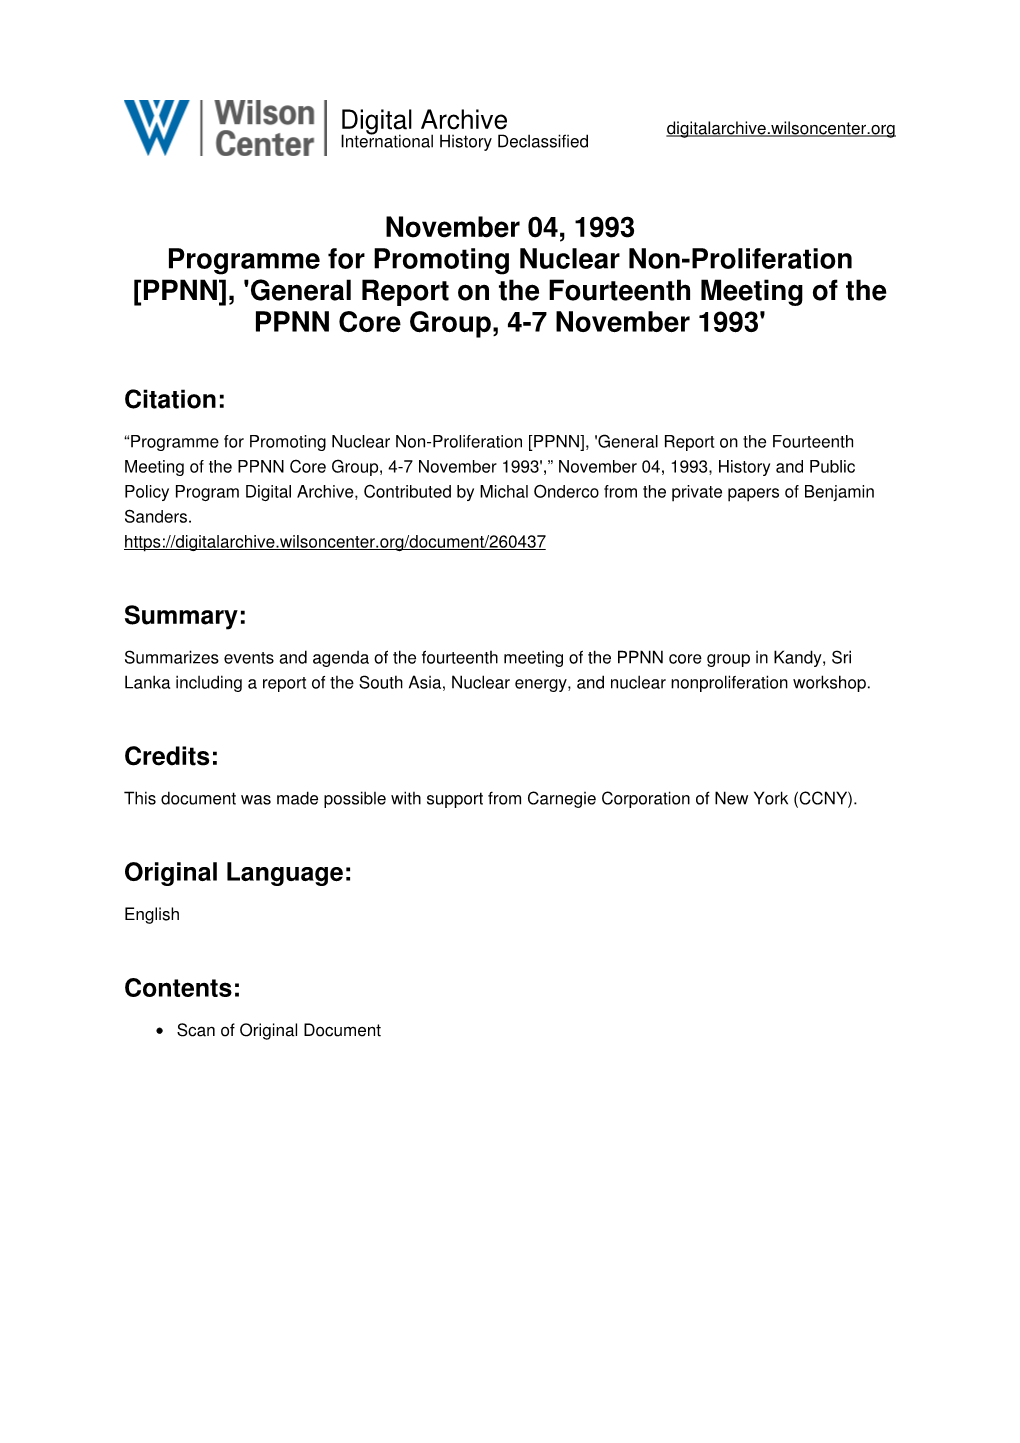 November 04, 1993 Programme for Promoting Nuclear Non-Proliferation [PPNN], 'General Report on the Fourteenth Meeting of the PPNN Core Group, 4-7 November 1993'